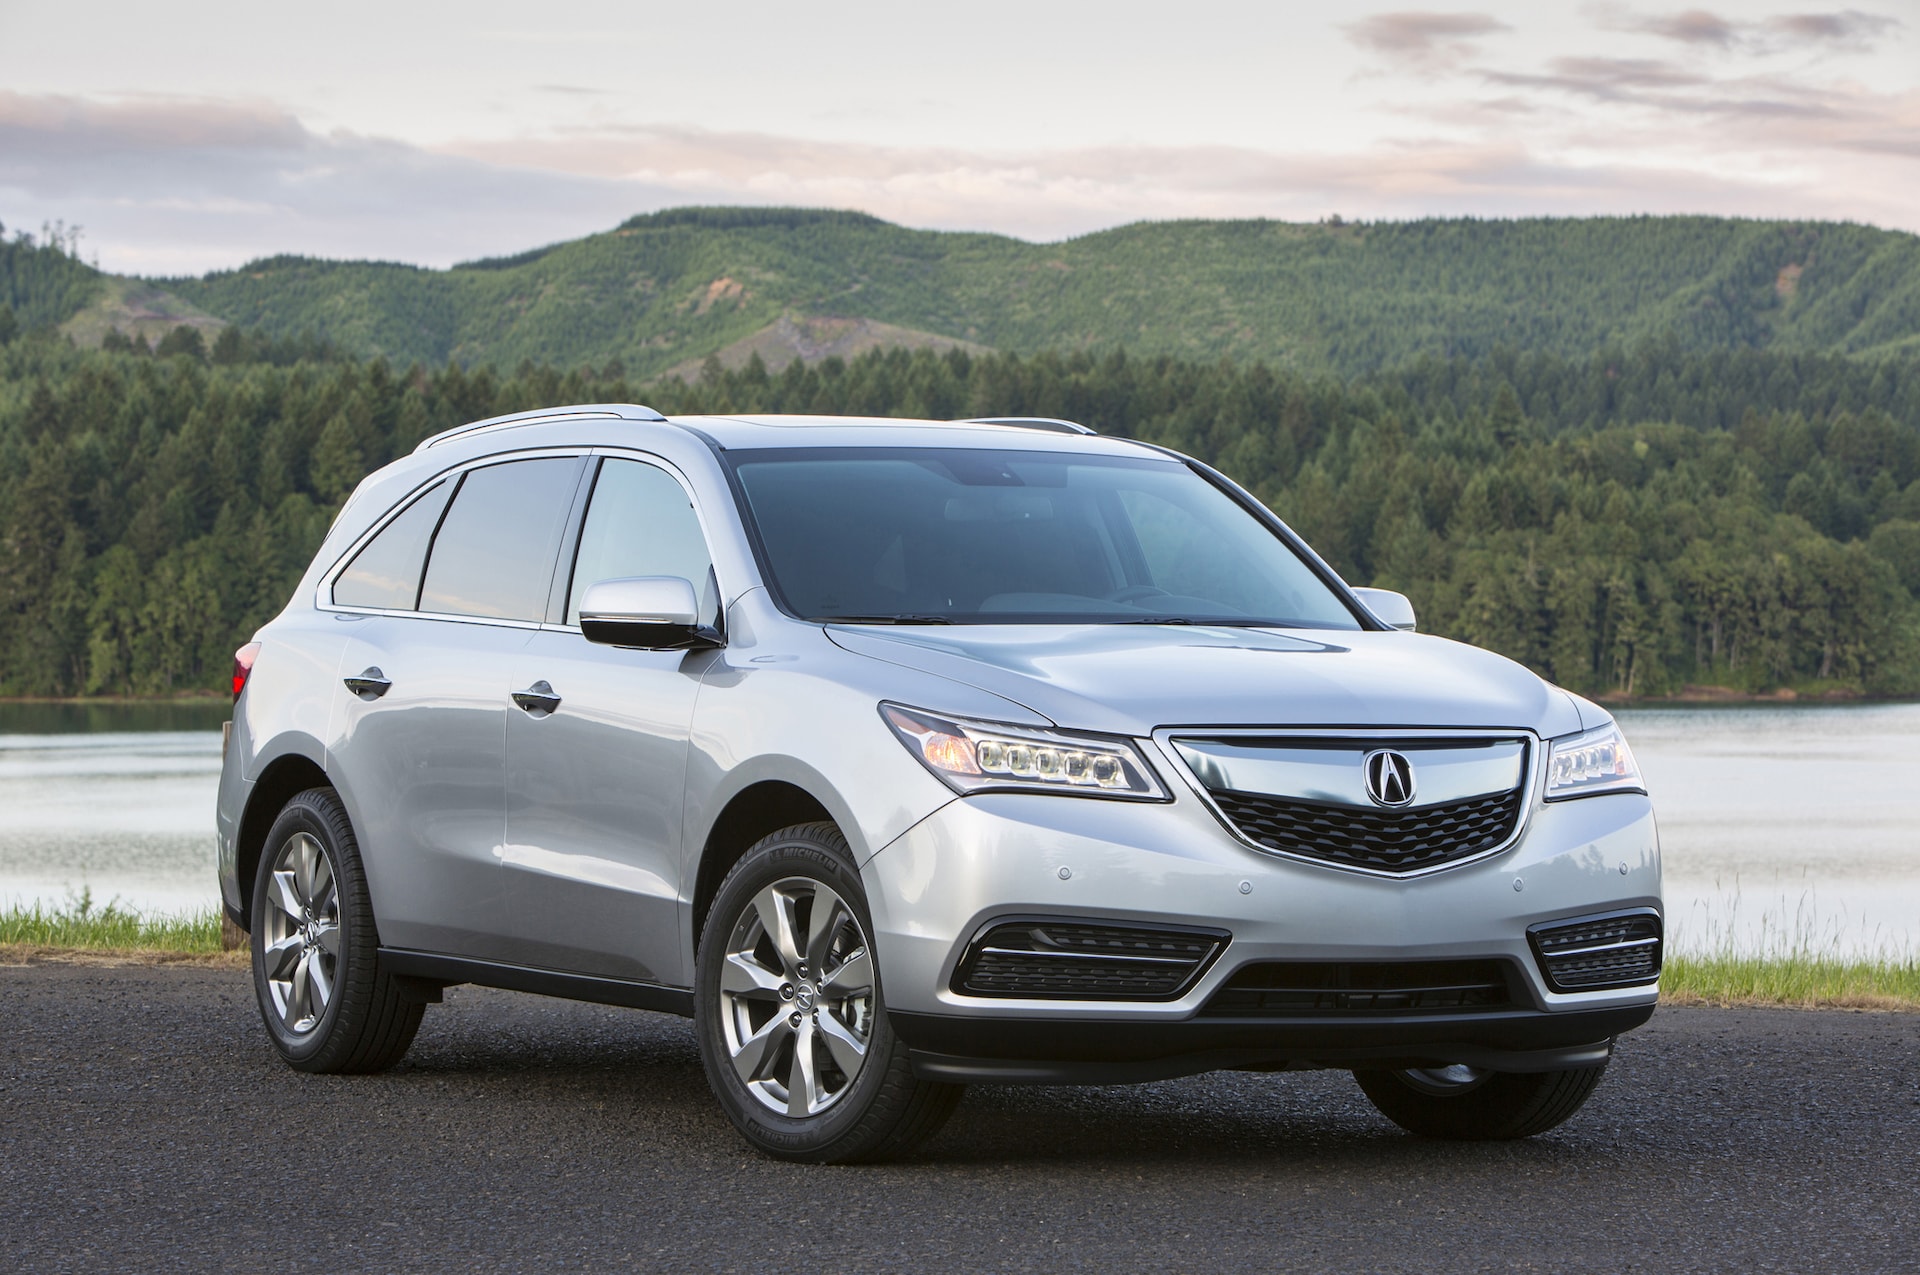 2015 Acura MDX Priced at $43,460